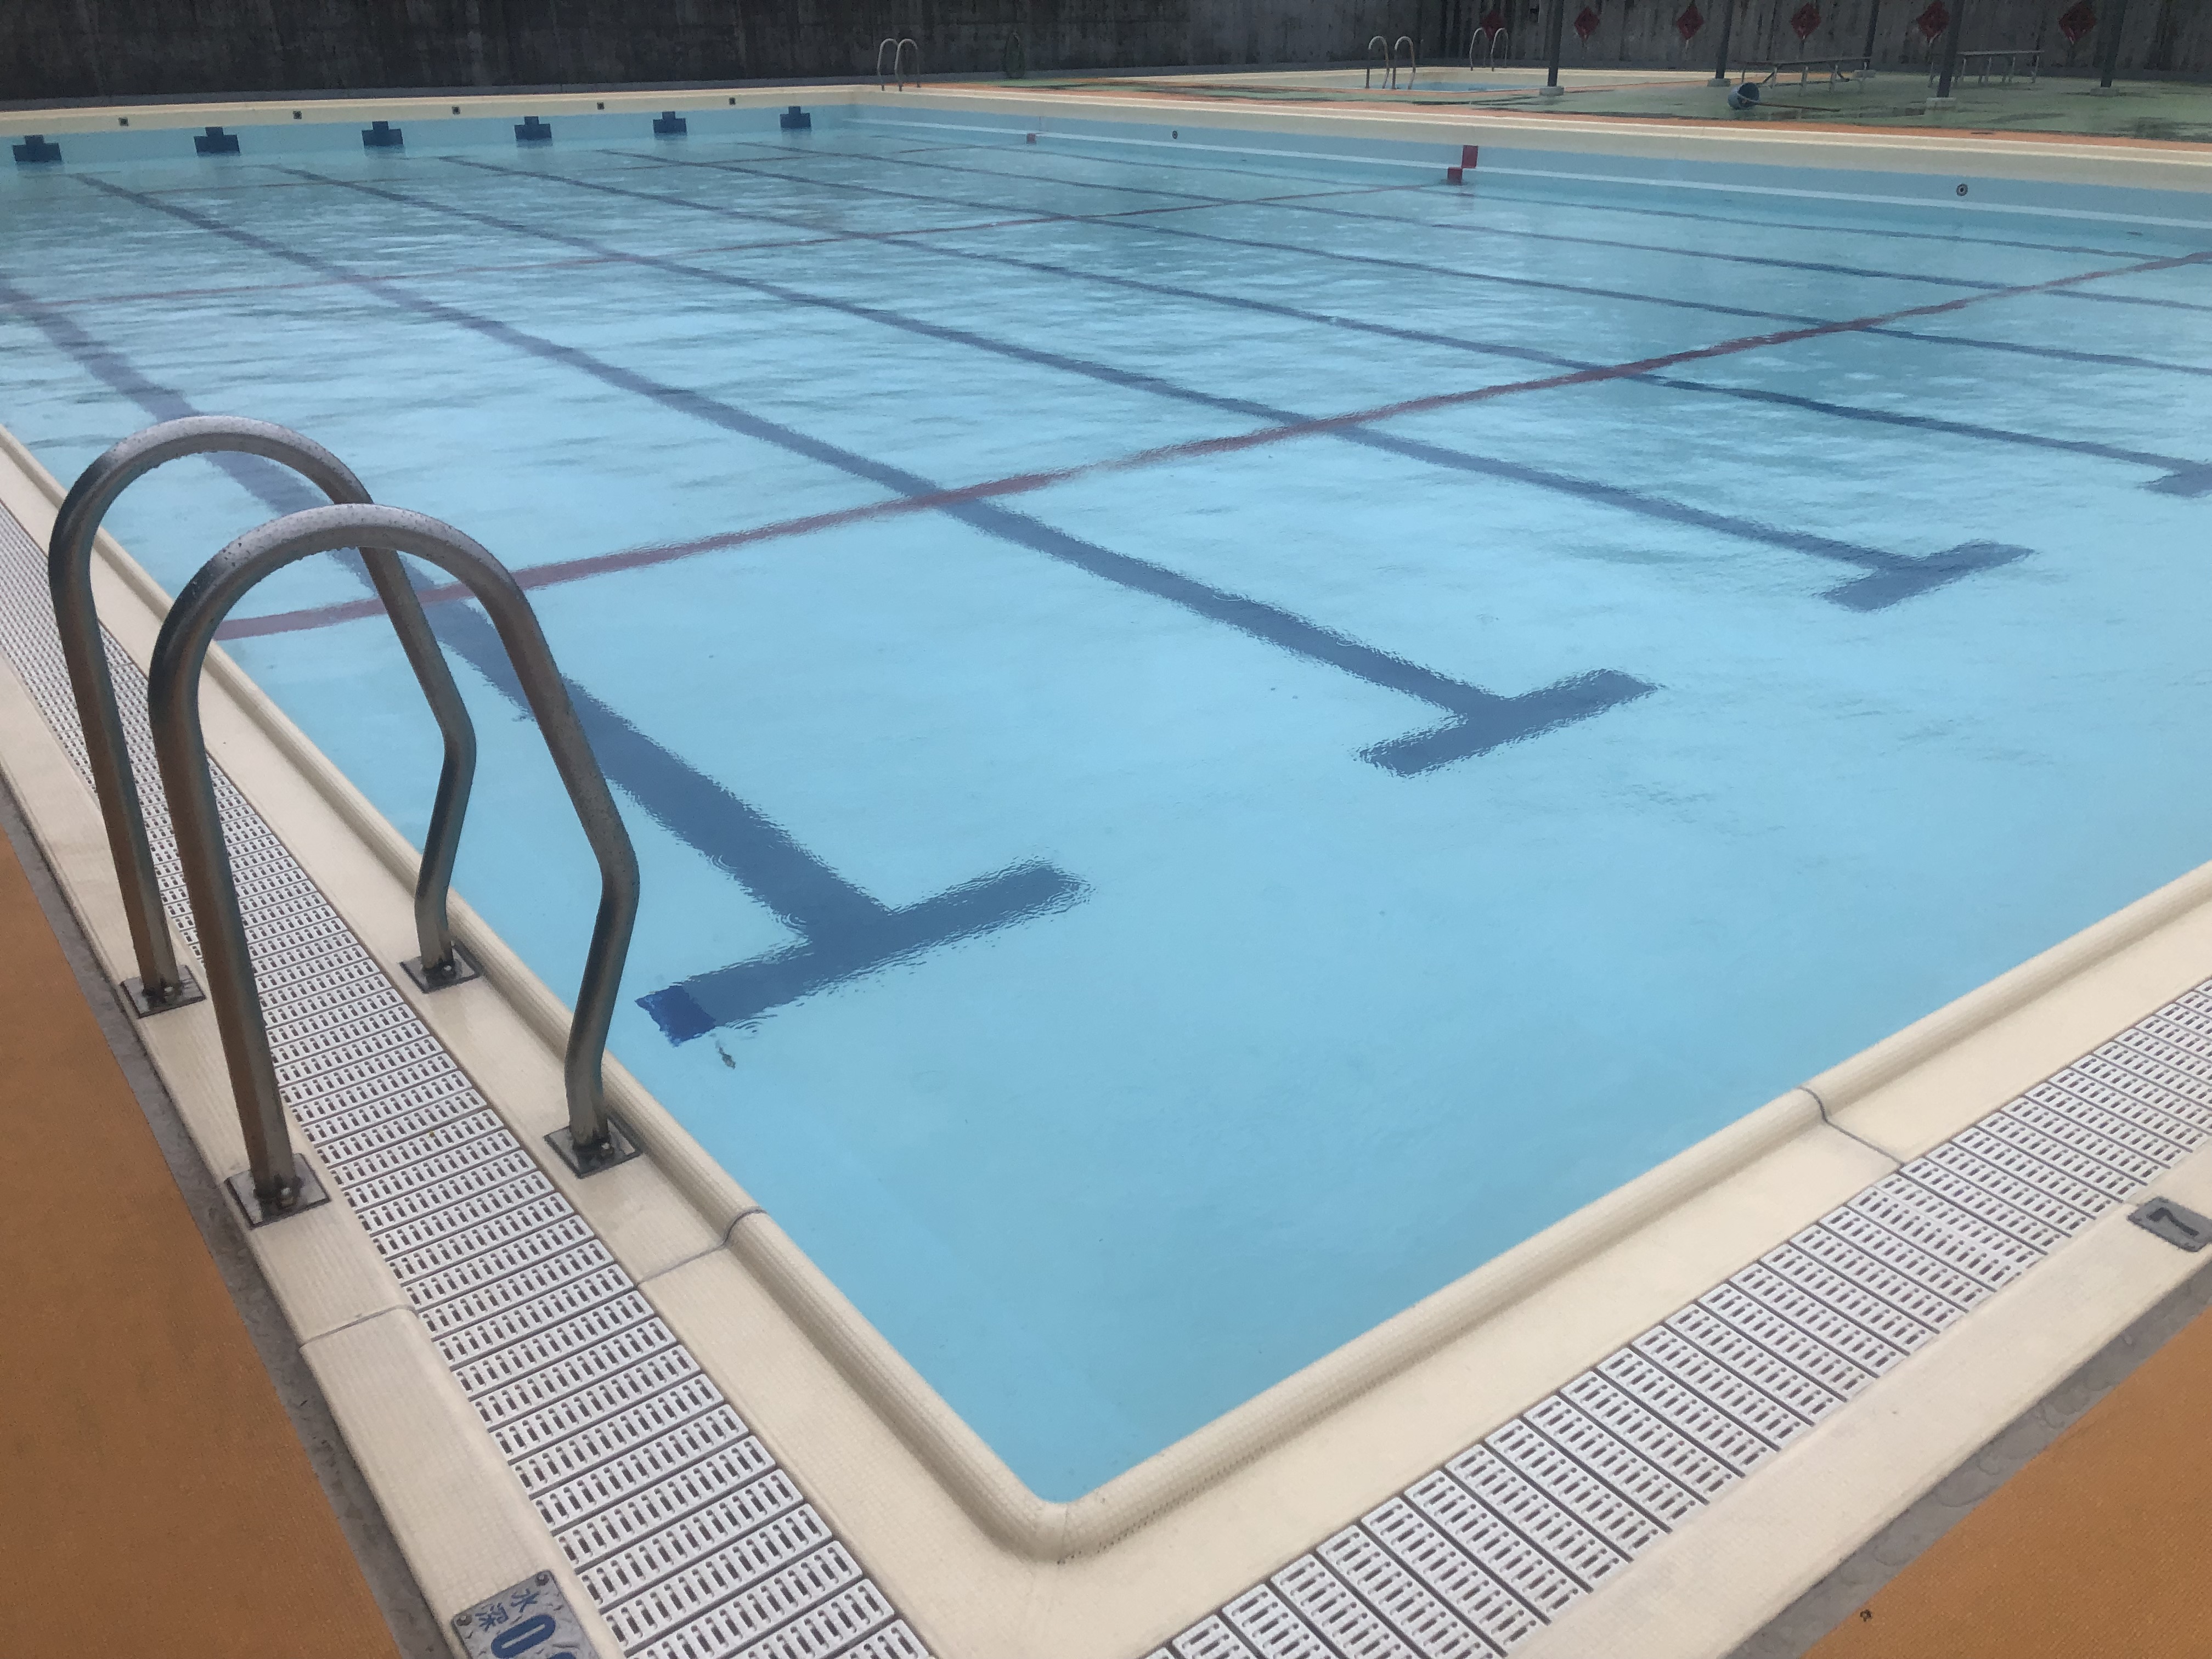 Case study: Swimming Pool Cleanup as Eco-Education